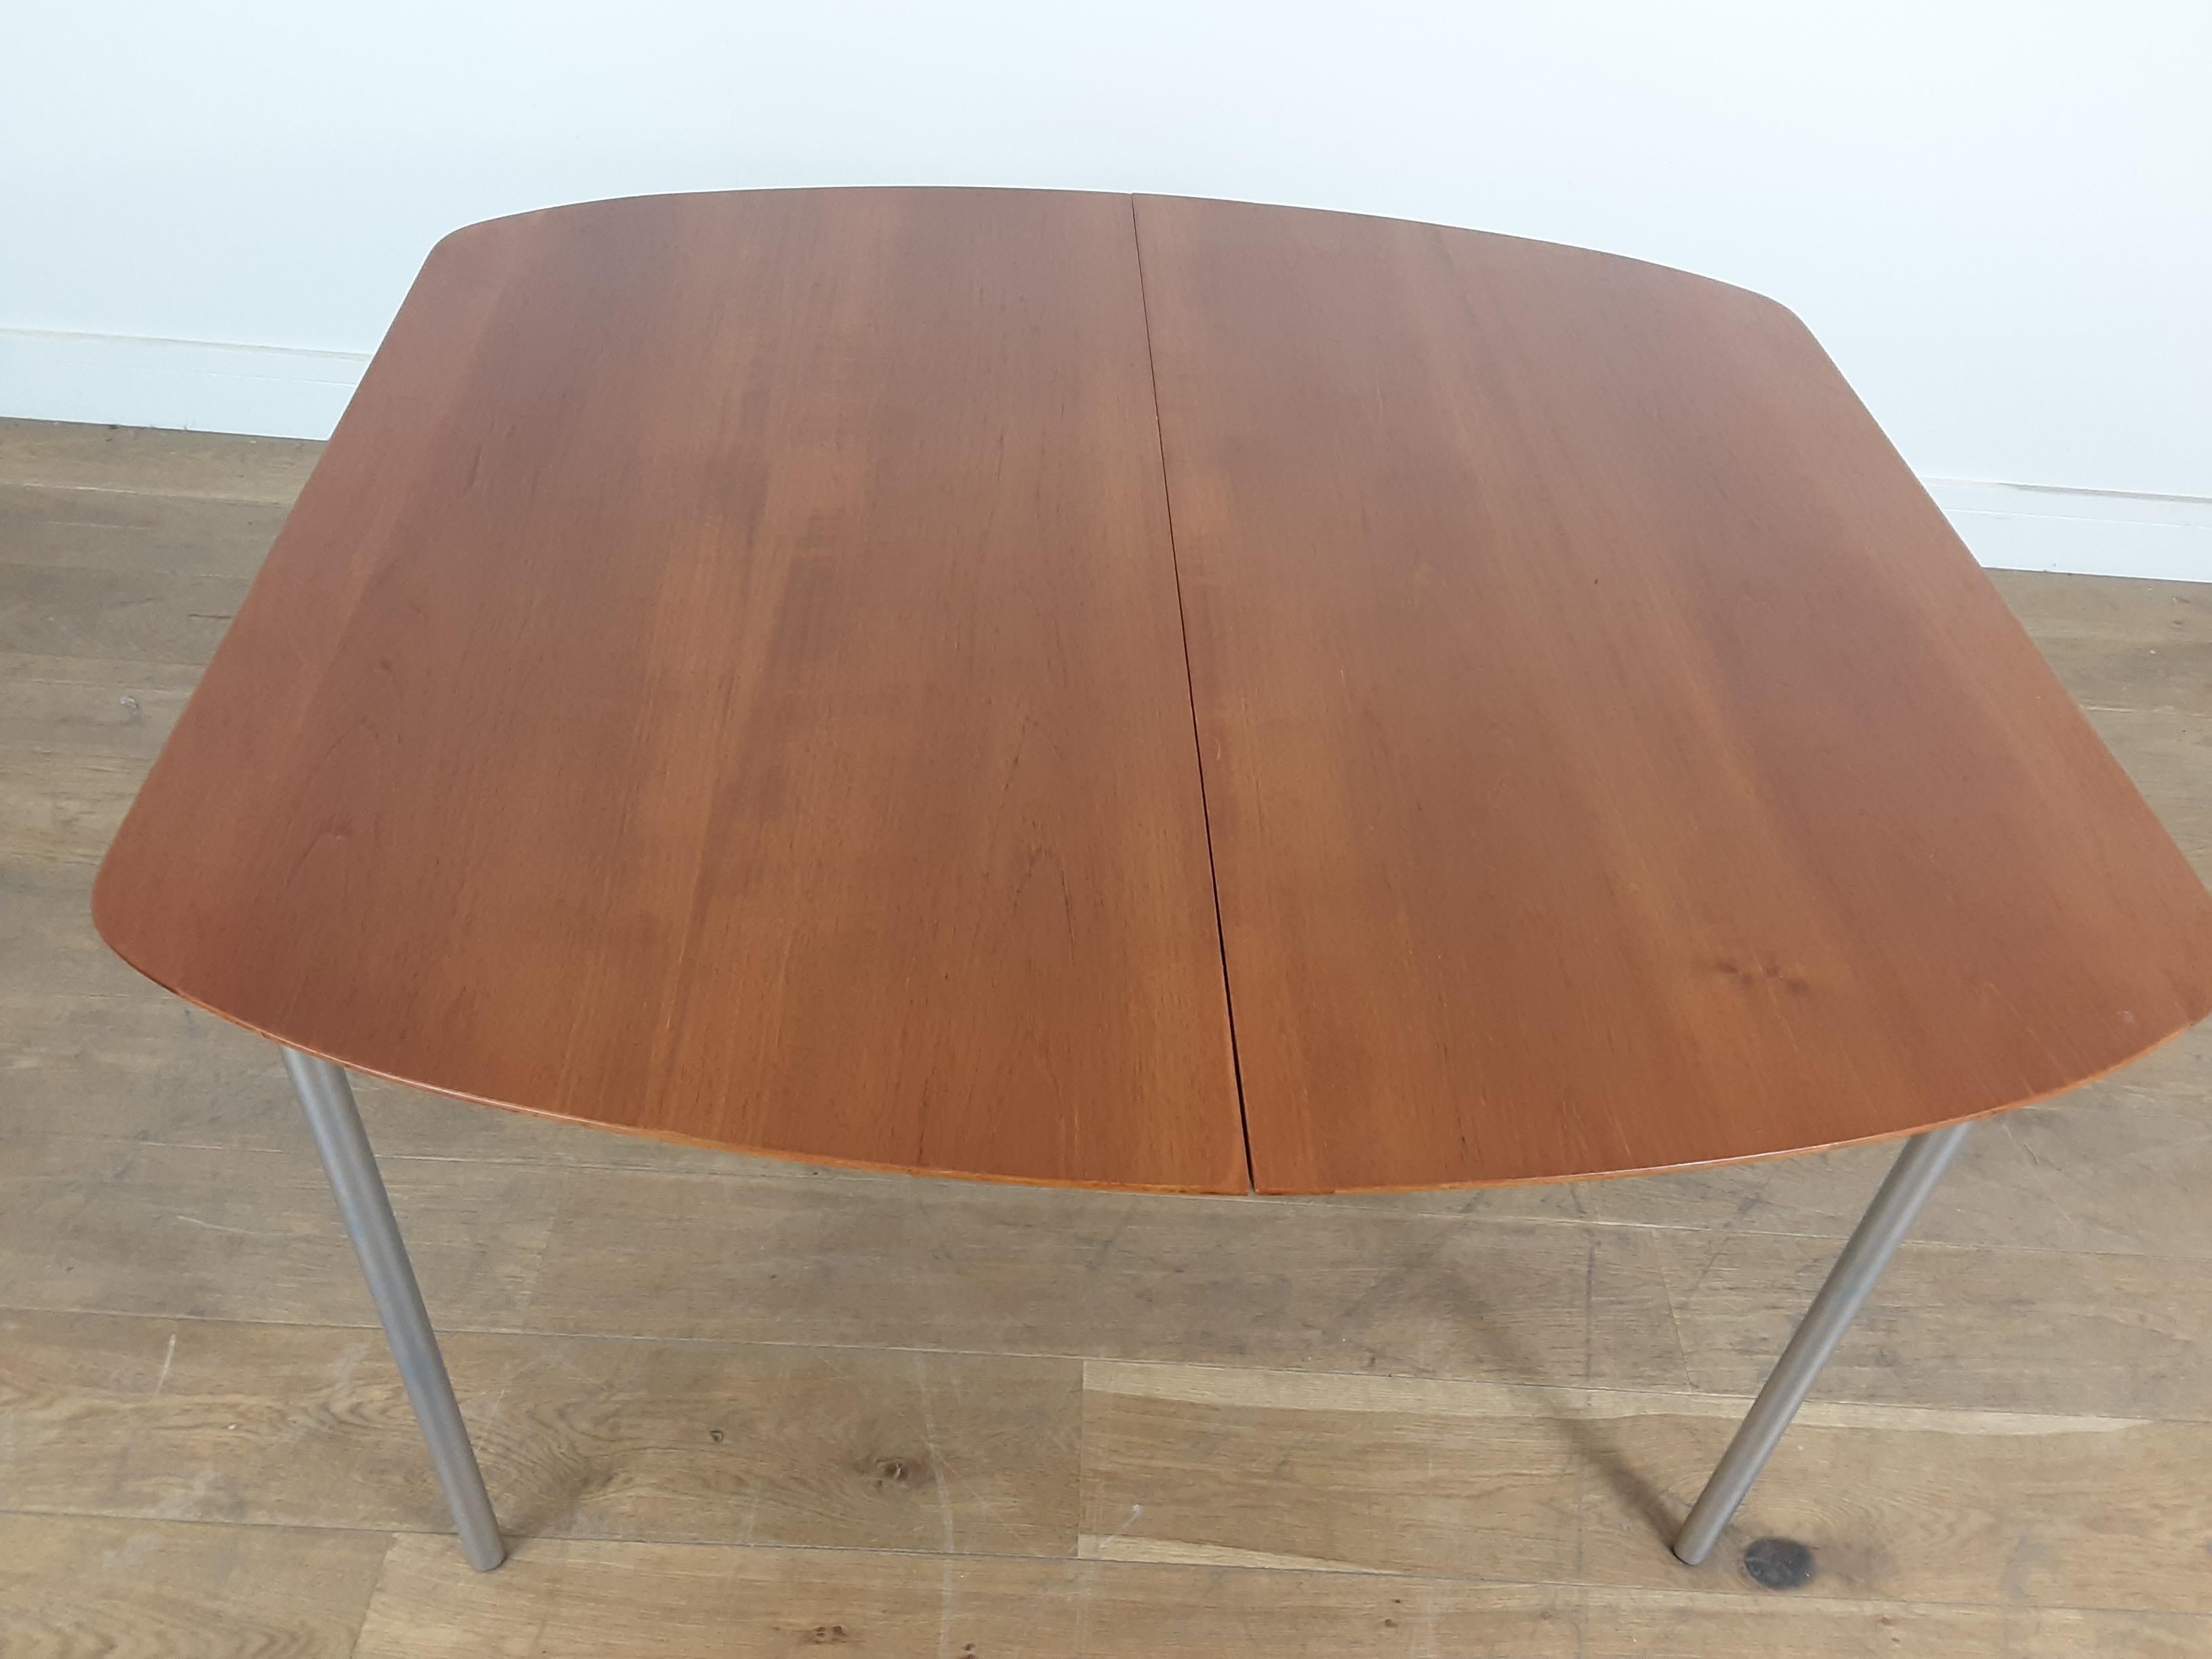 20th Century Midcentury Teak Dining Table and 4 Chairs by John and Sylvia Reid for Stag For Sale